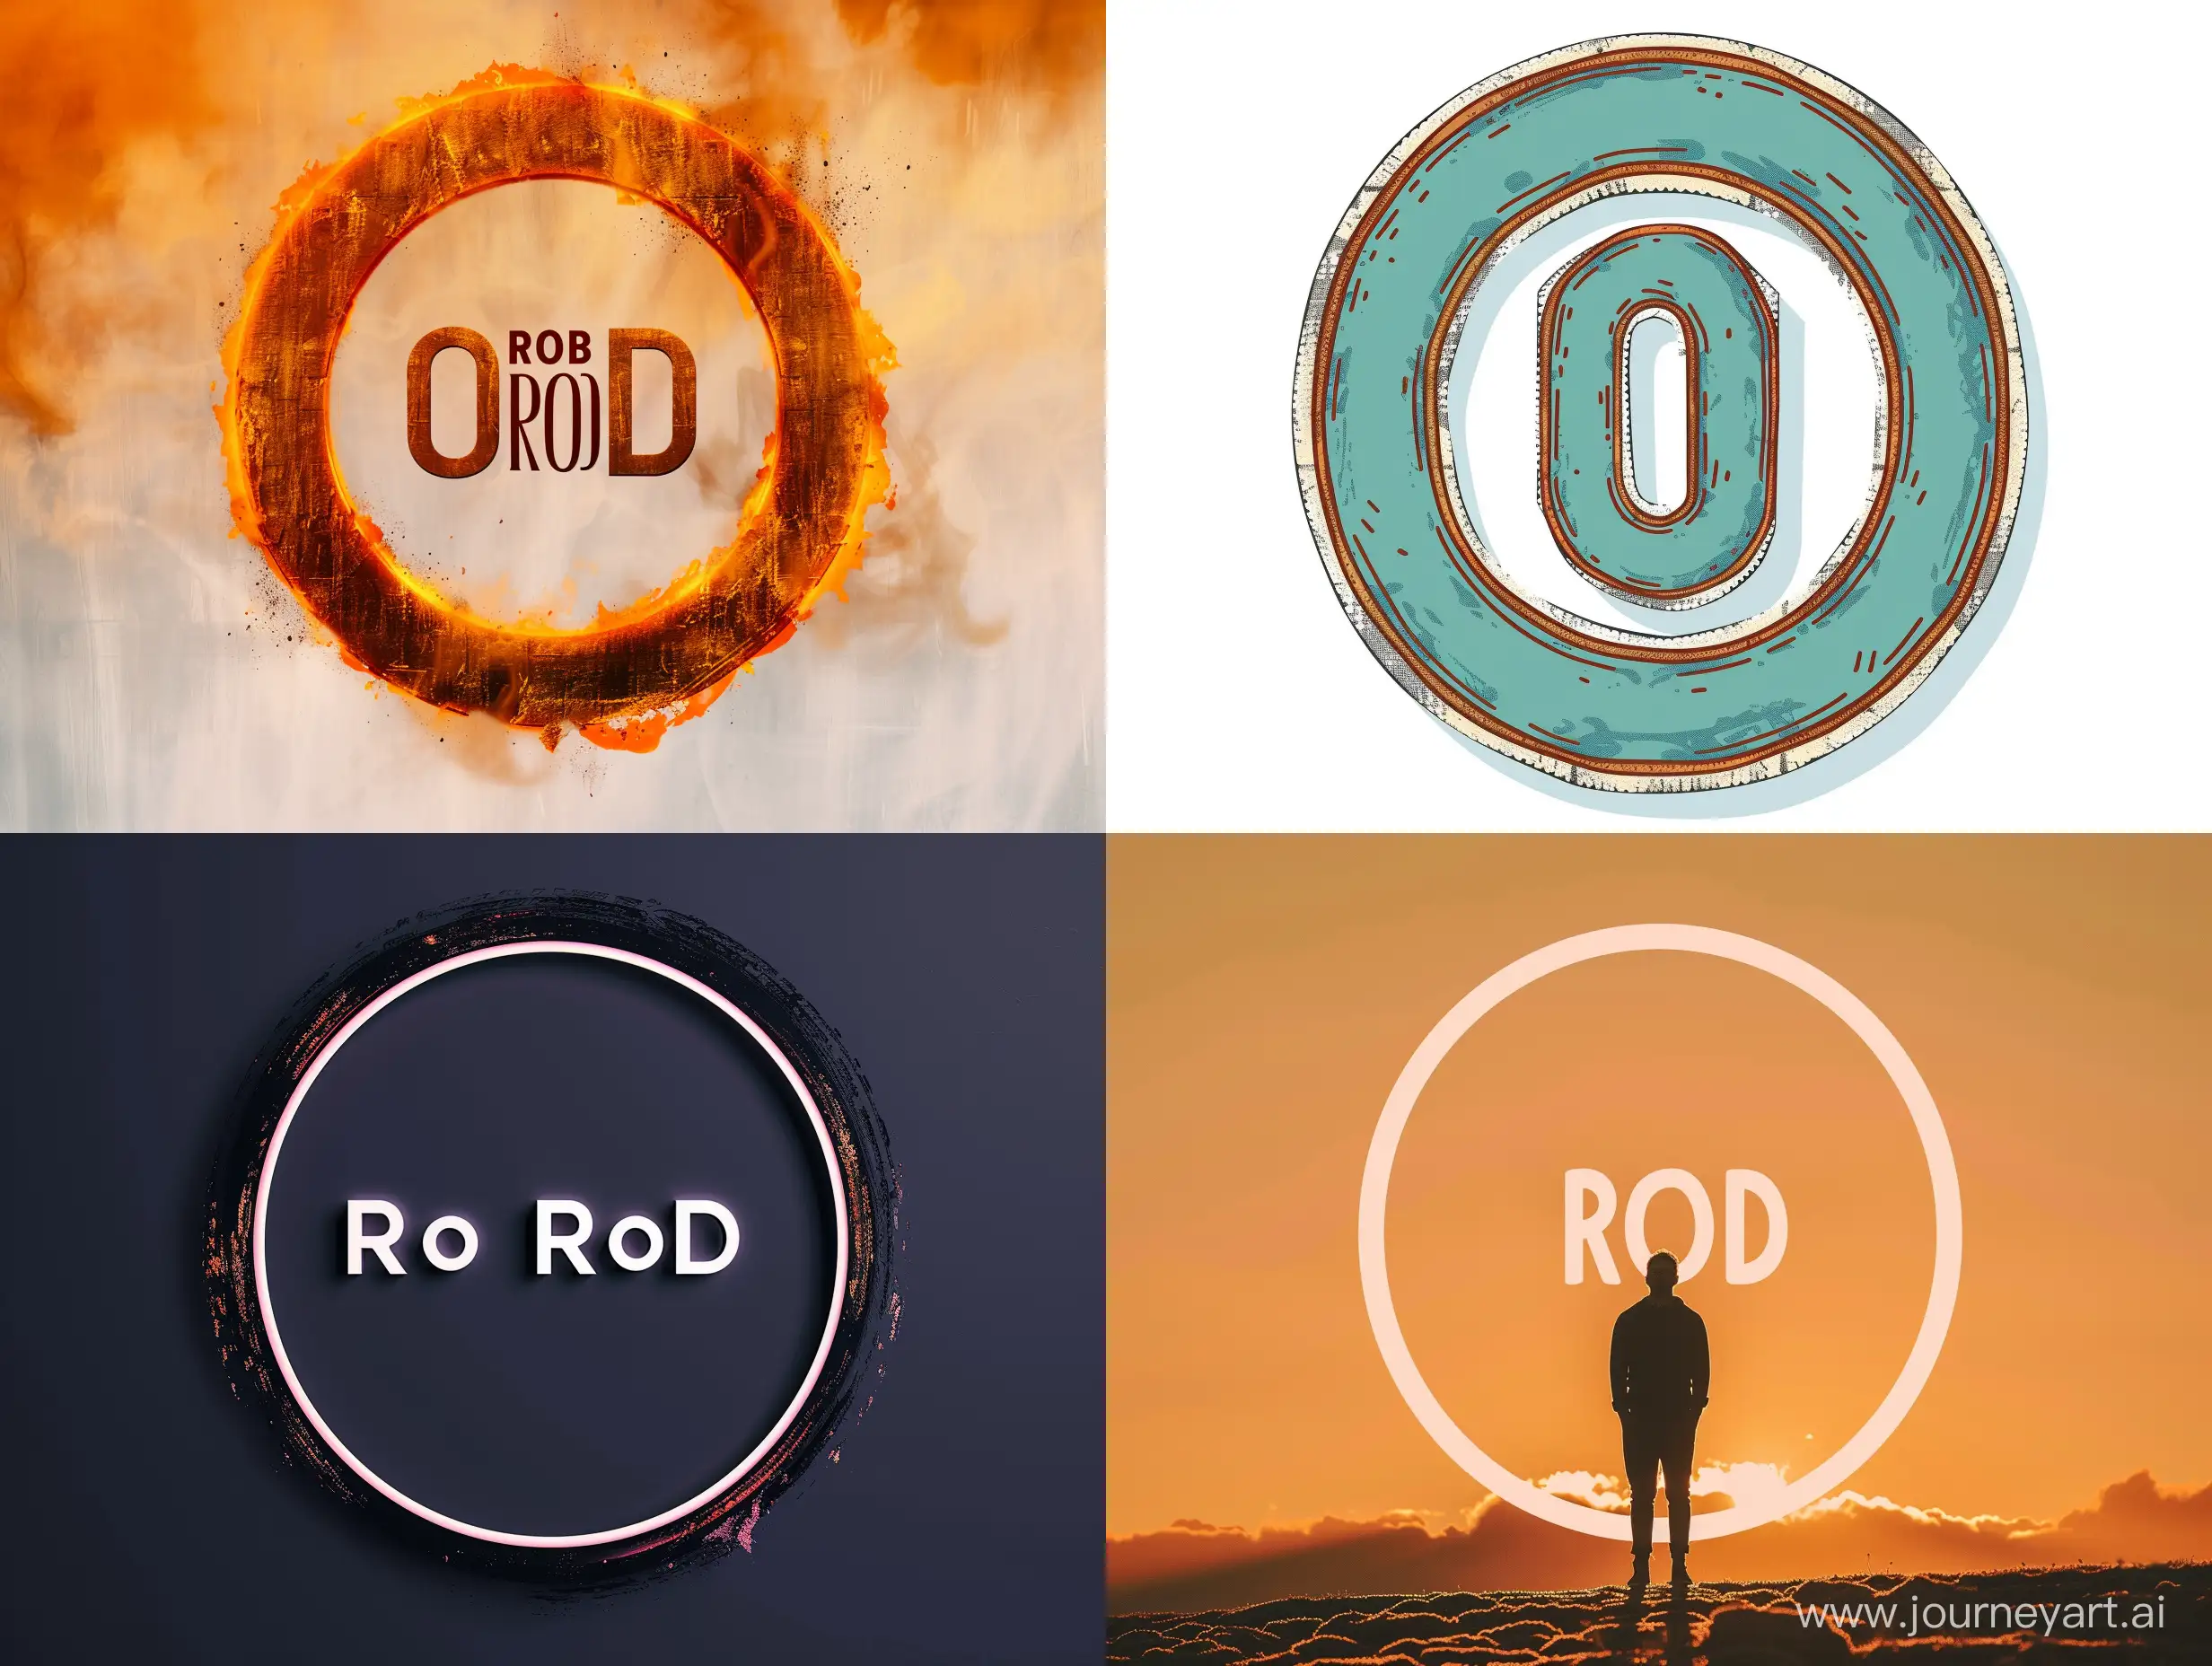 A big circle with the name of ROB ROD in the middle of the circle sharing the same O
